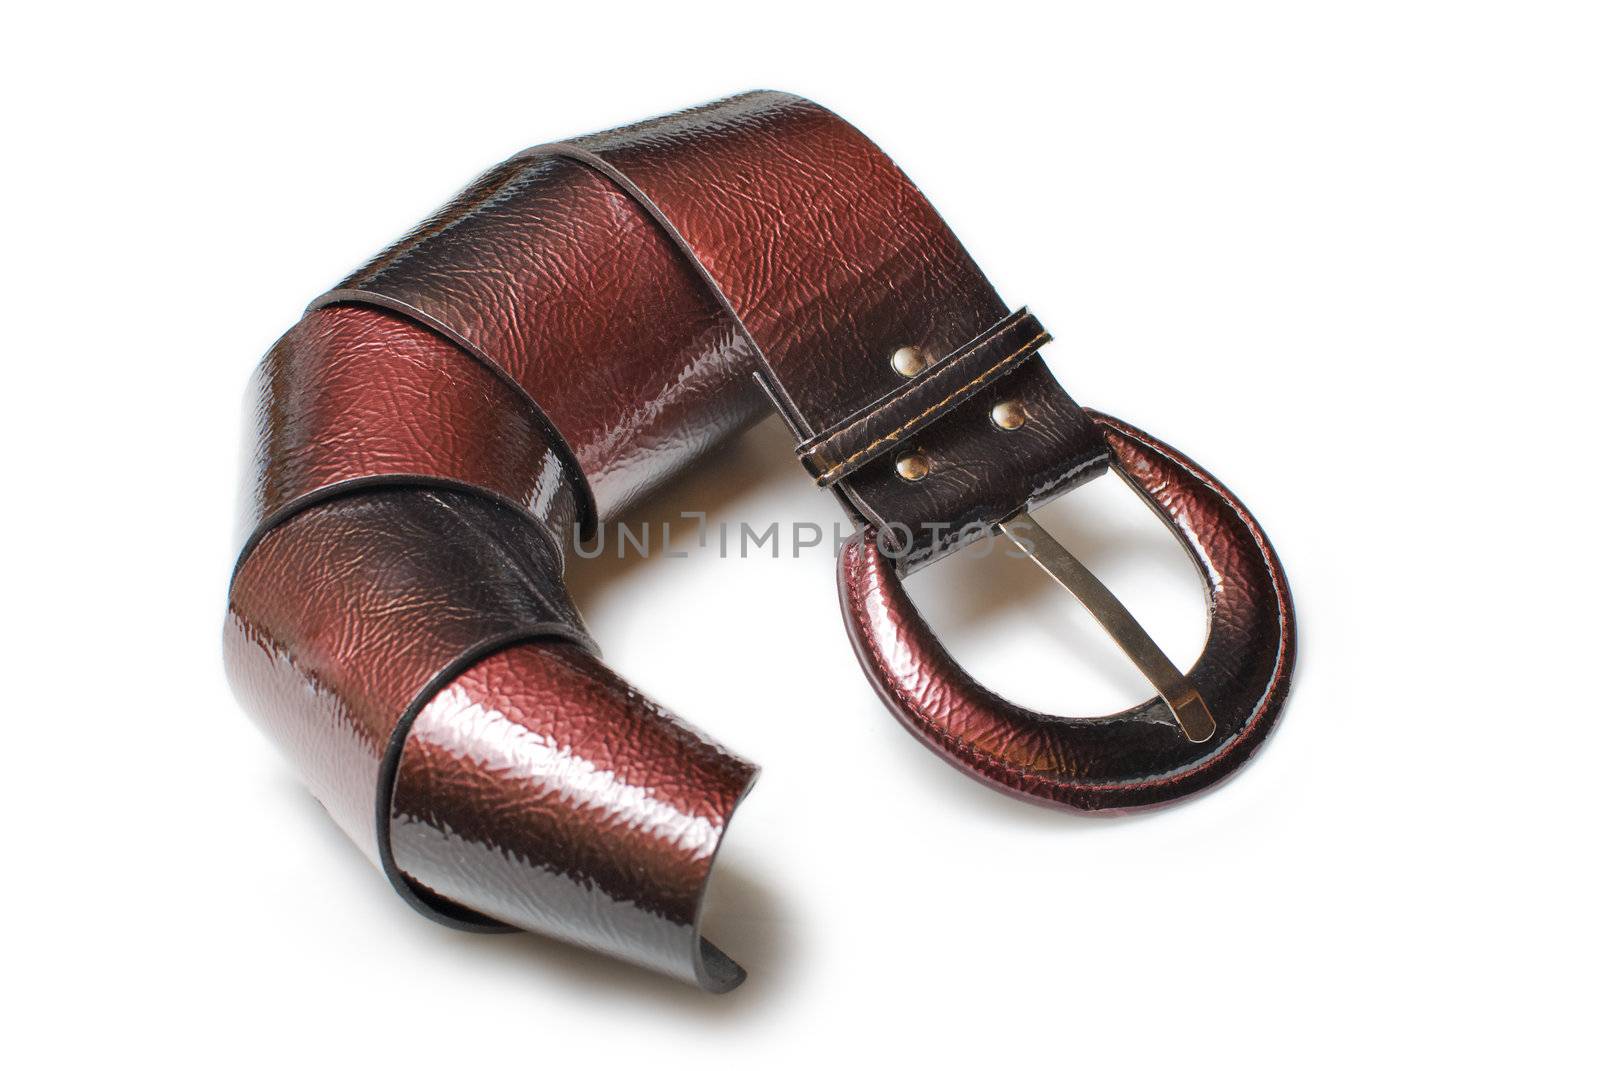 Red woman leather belt curved and isolated on white back ground
